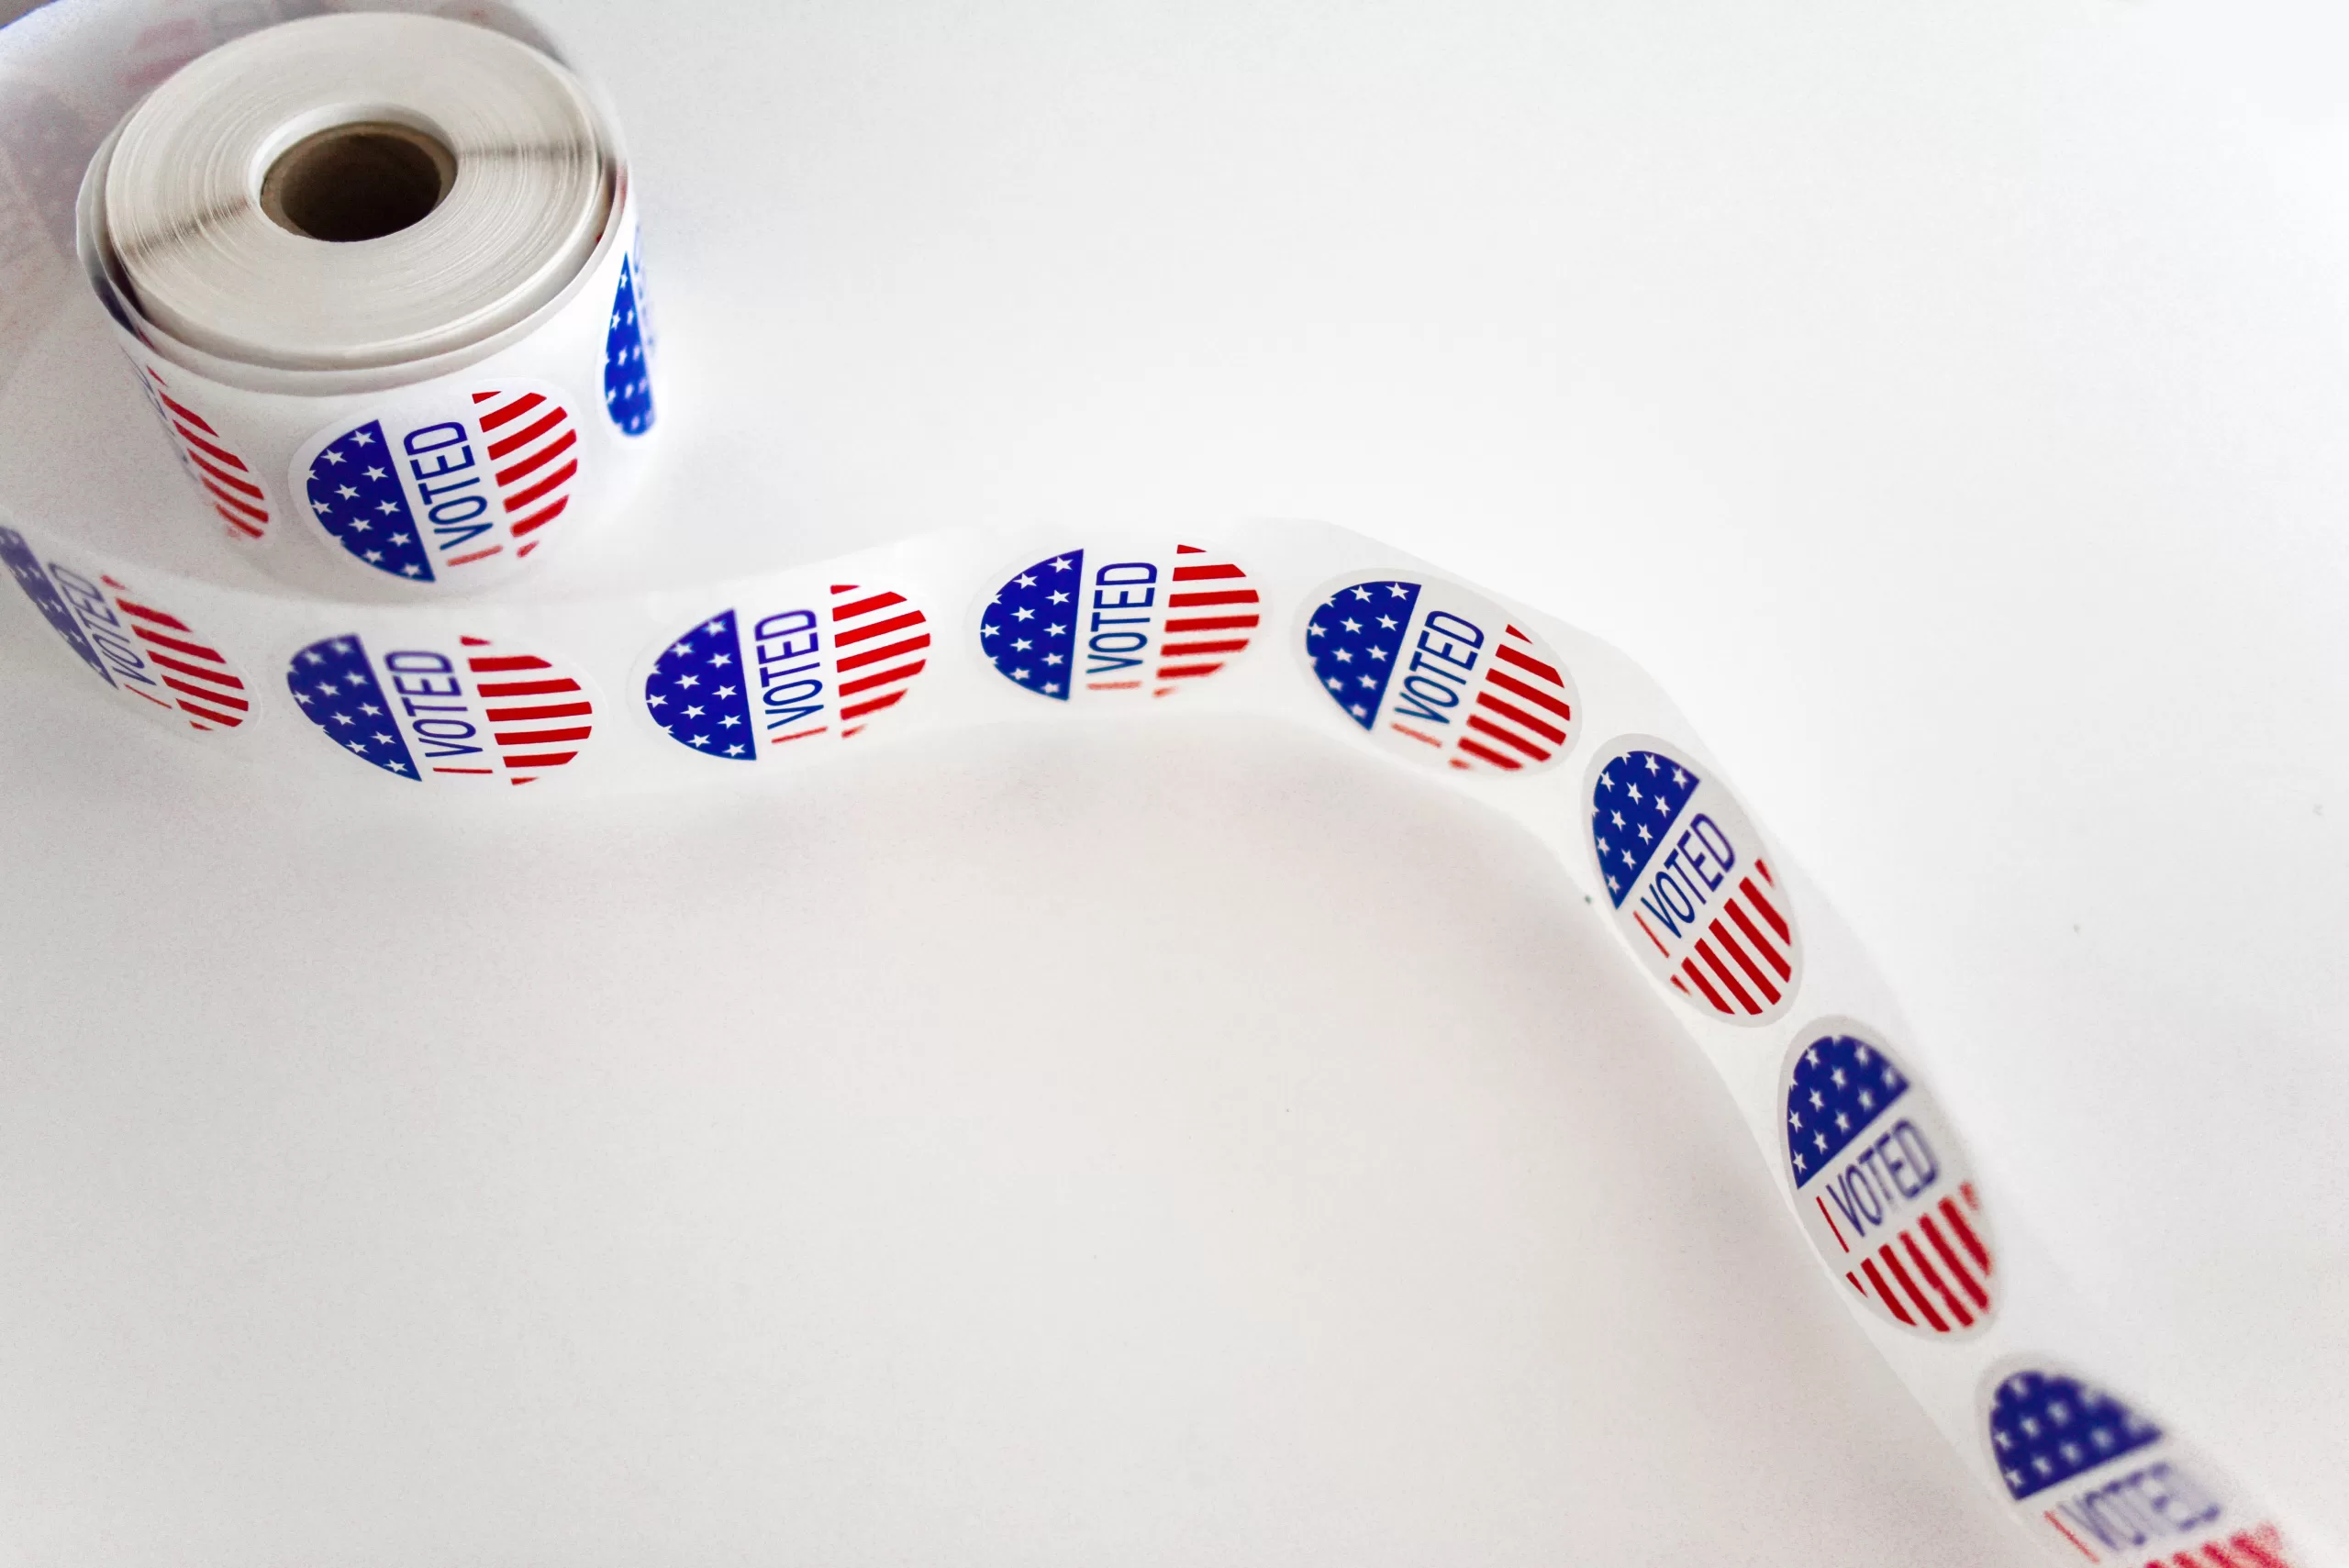 A roll of "I voted" stickers with the end loose on a white surface